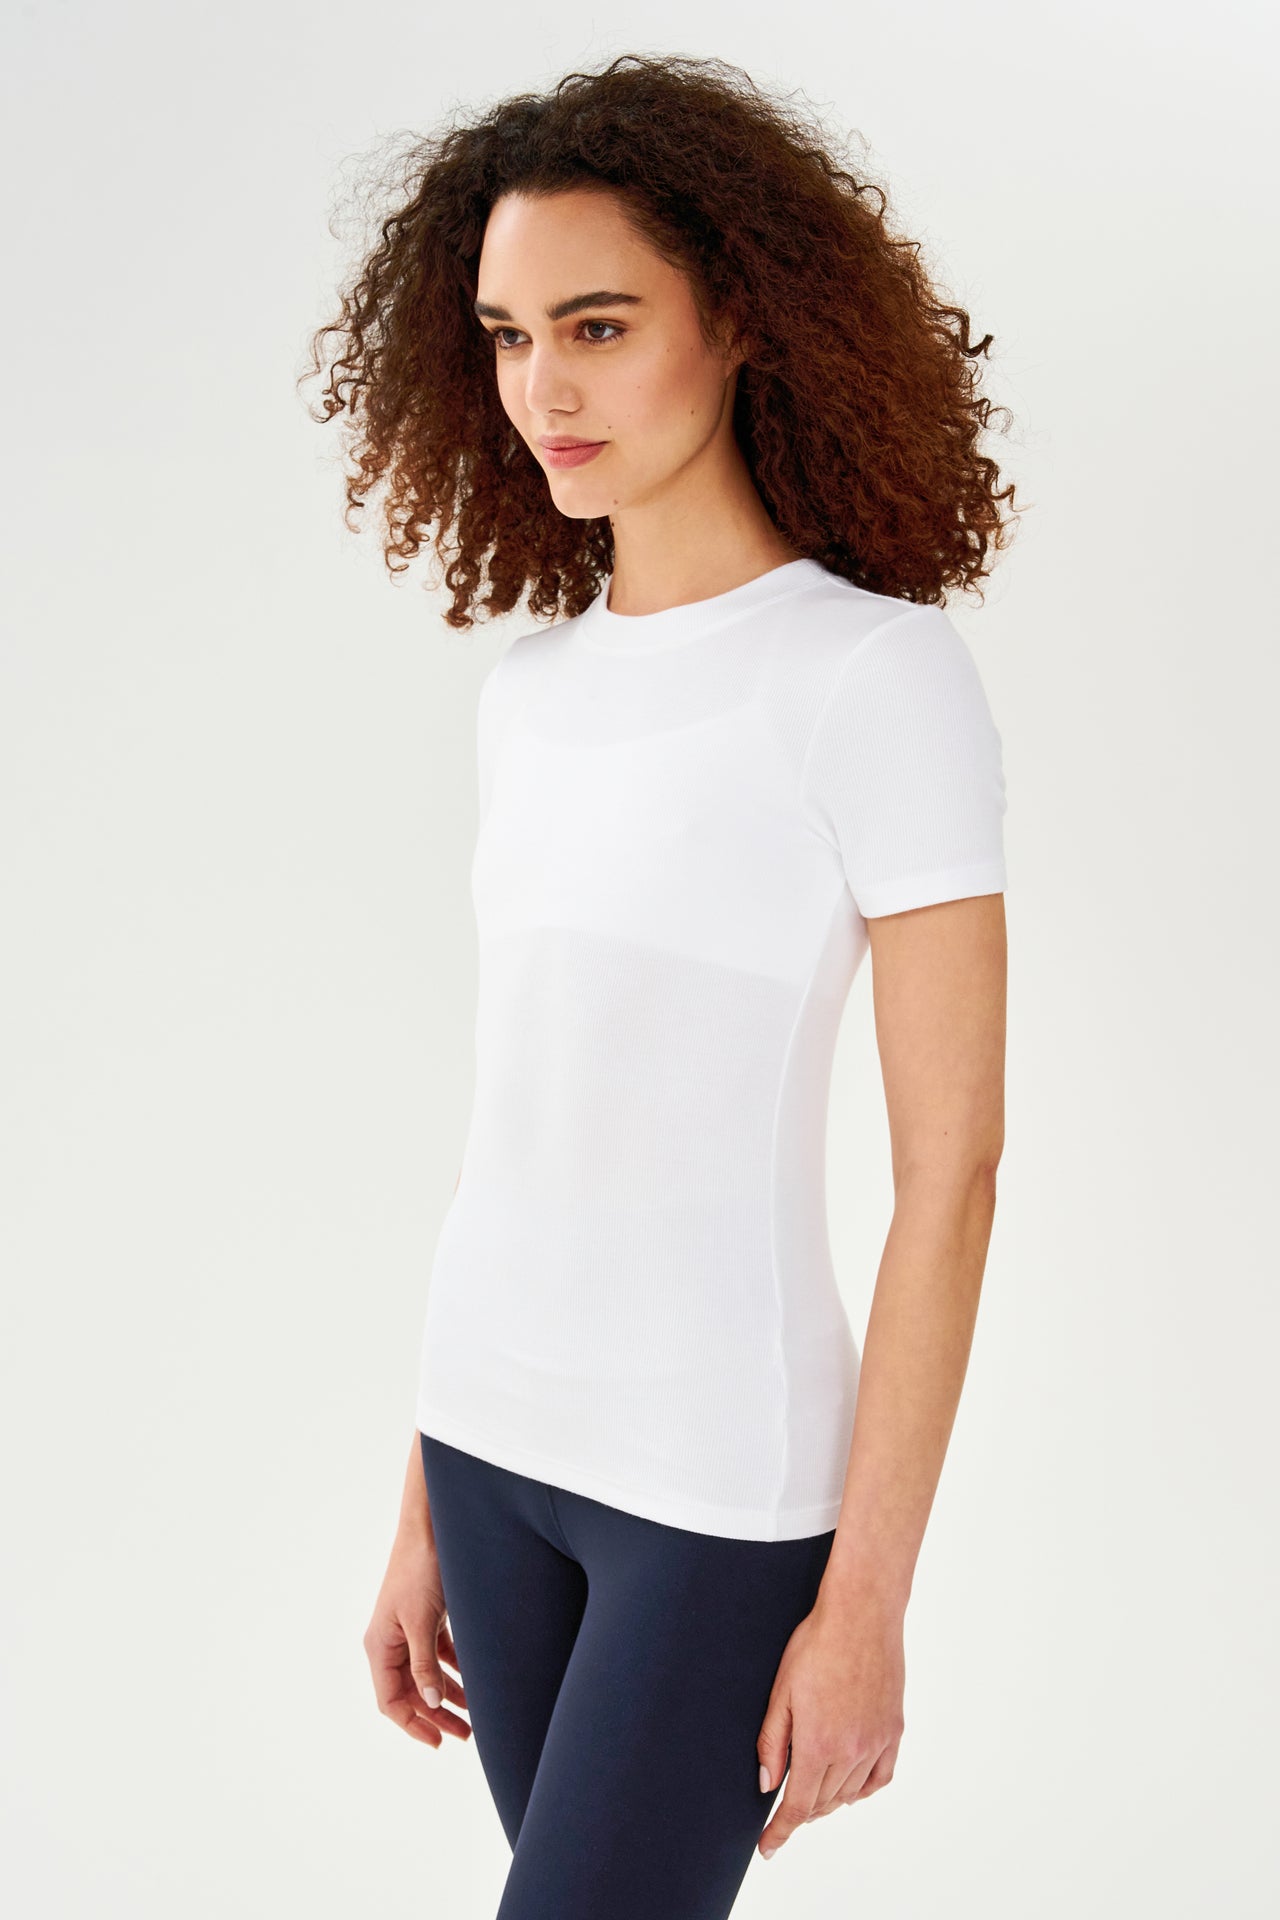 A woman wearing a SPLITS59 Louise Rib Short Sleeve - White t-shirt and leggings for yoga.